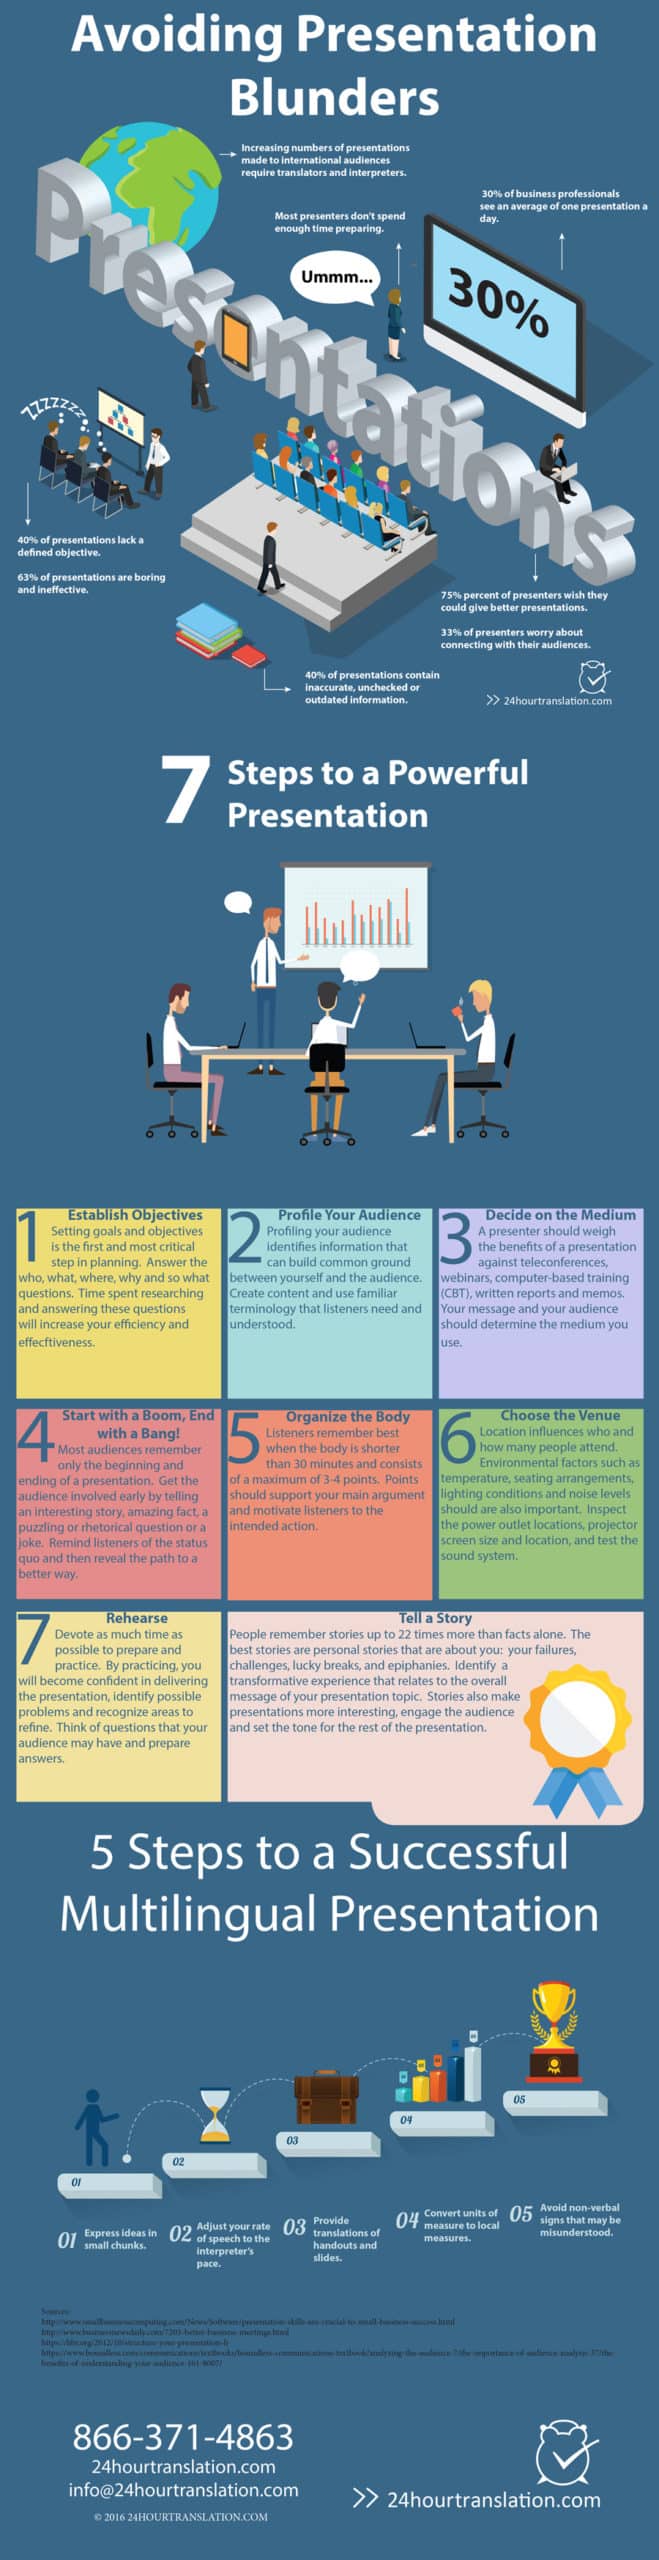 This infographic offers tips on developing presentations. It includes information on giving presentations to multilingual audiences. The topics nclude avoiding common mistakes, working with interpreters and translators, telling stories. setting goals and practicing.